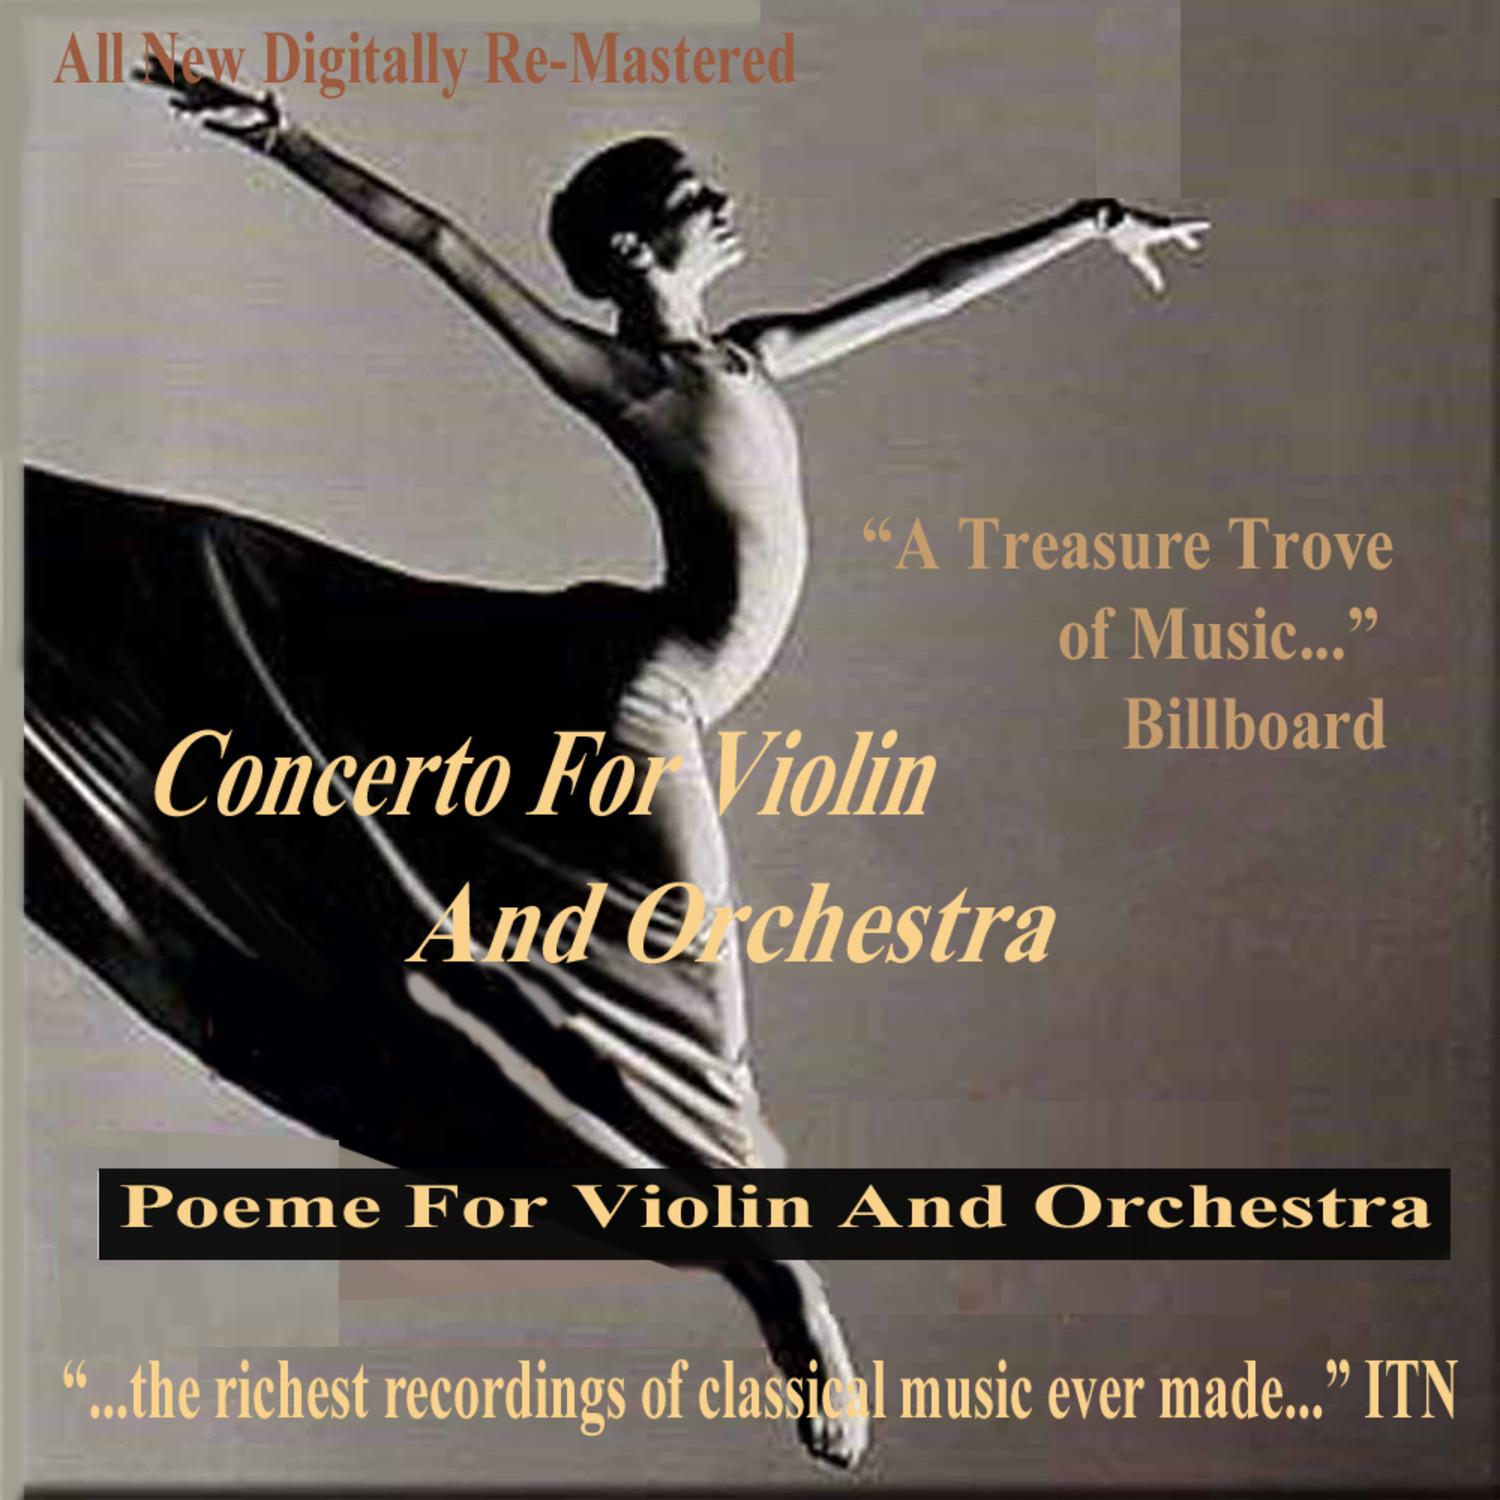 Concerto for Violin and Orchestra - Poeme for Violin and Orchestra